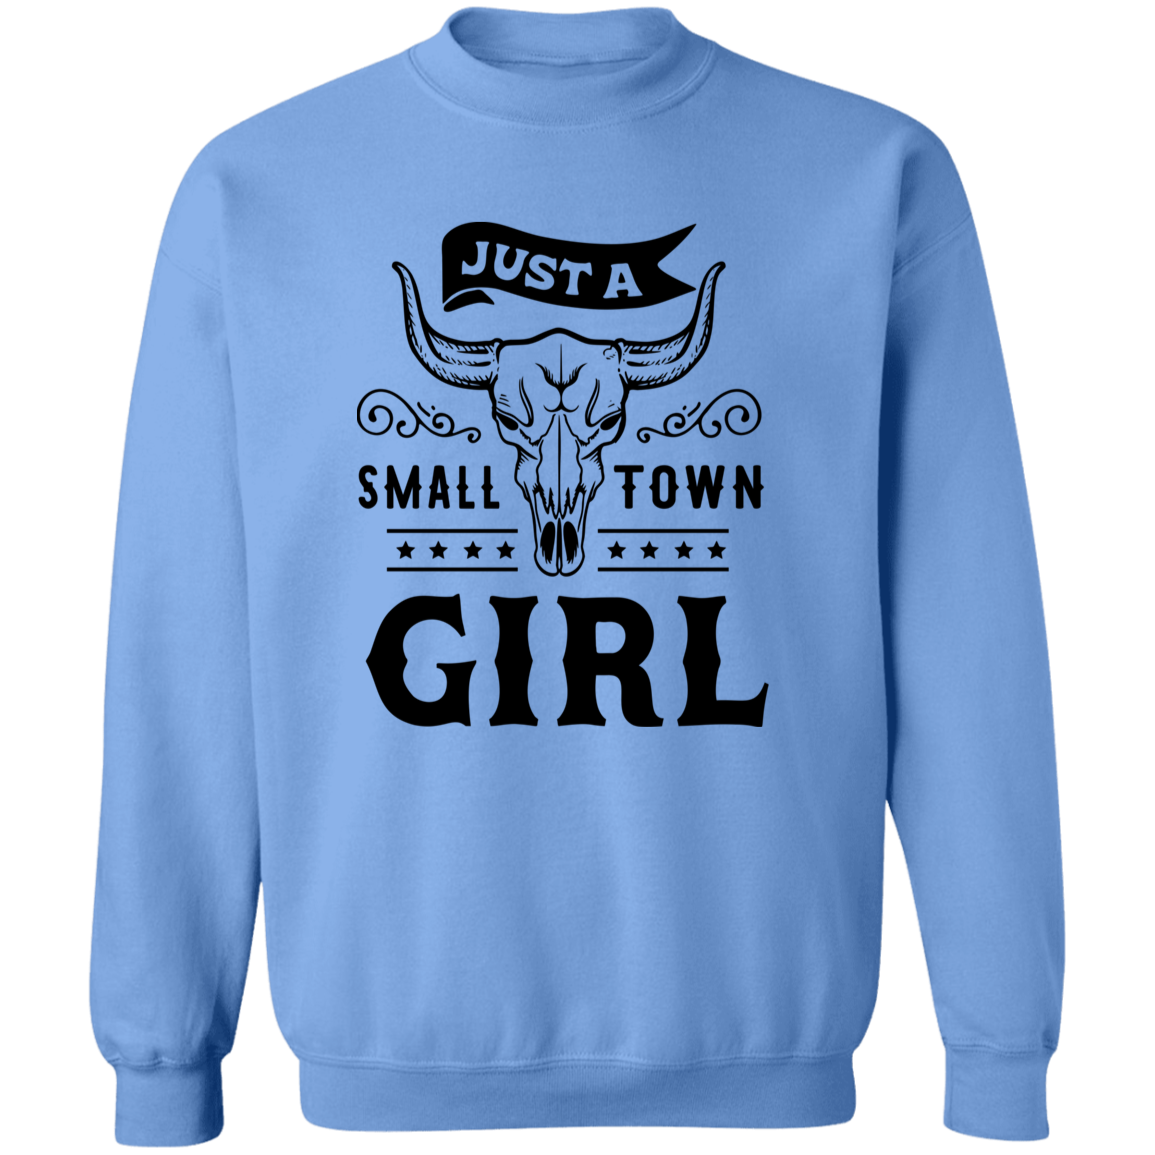 Just A Small Town Girl 1 G180 Crewneck Pullover Sweatshirt